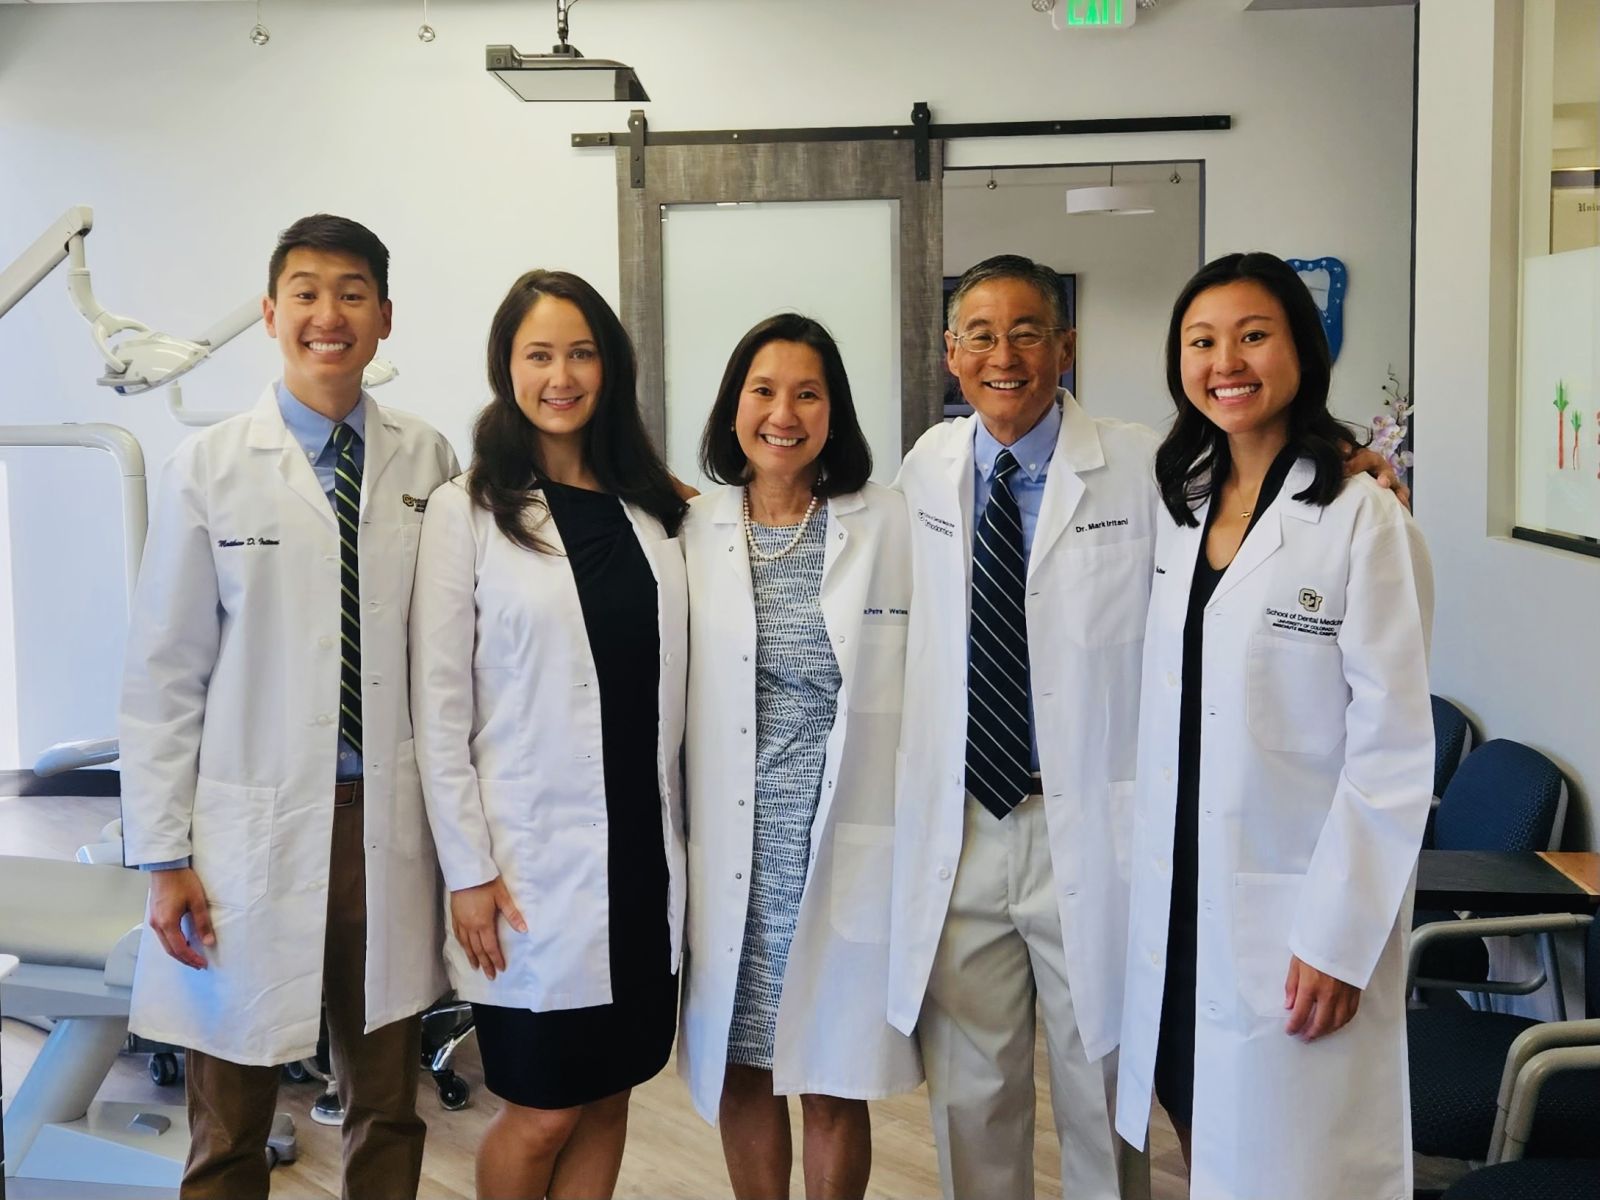 Iritani Family in White Coats with Dr. Dinkel